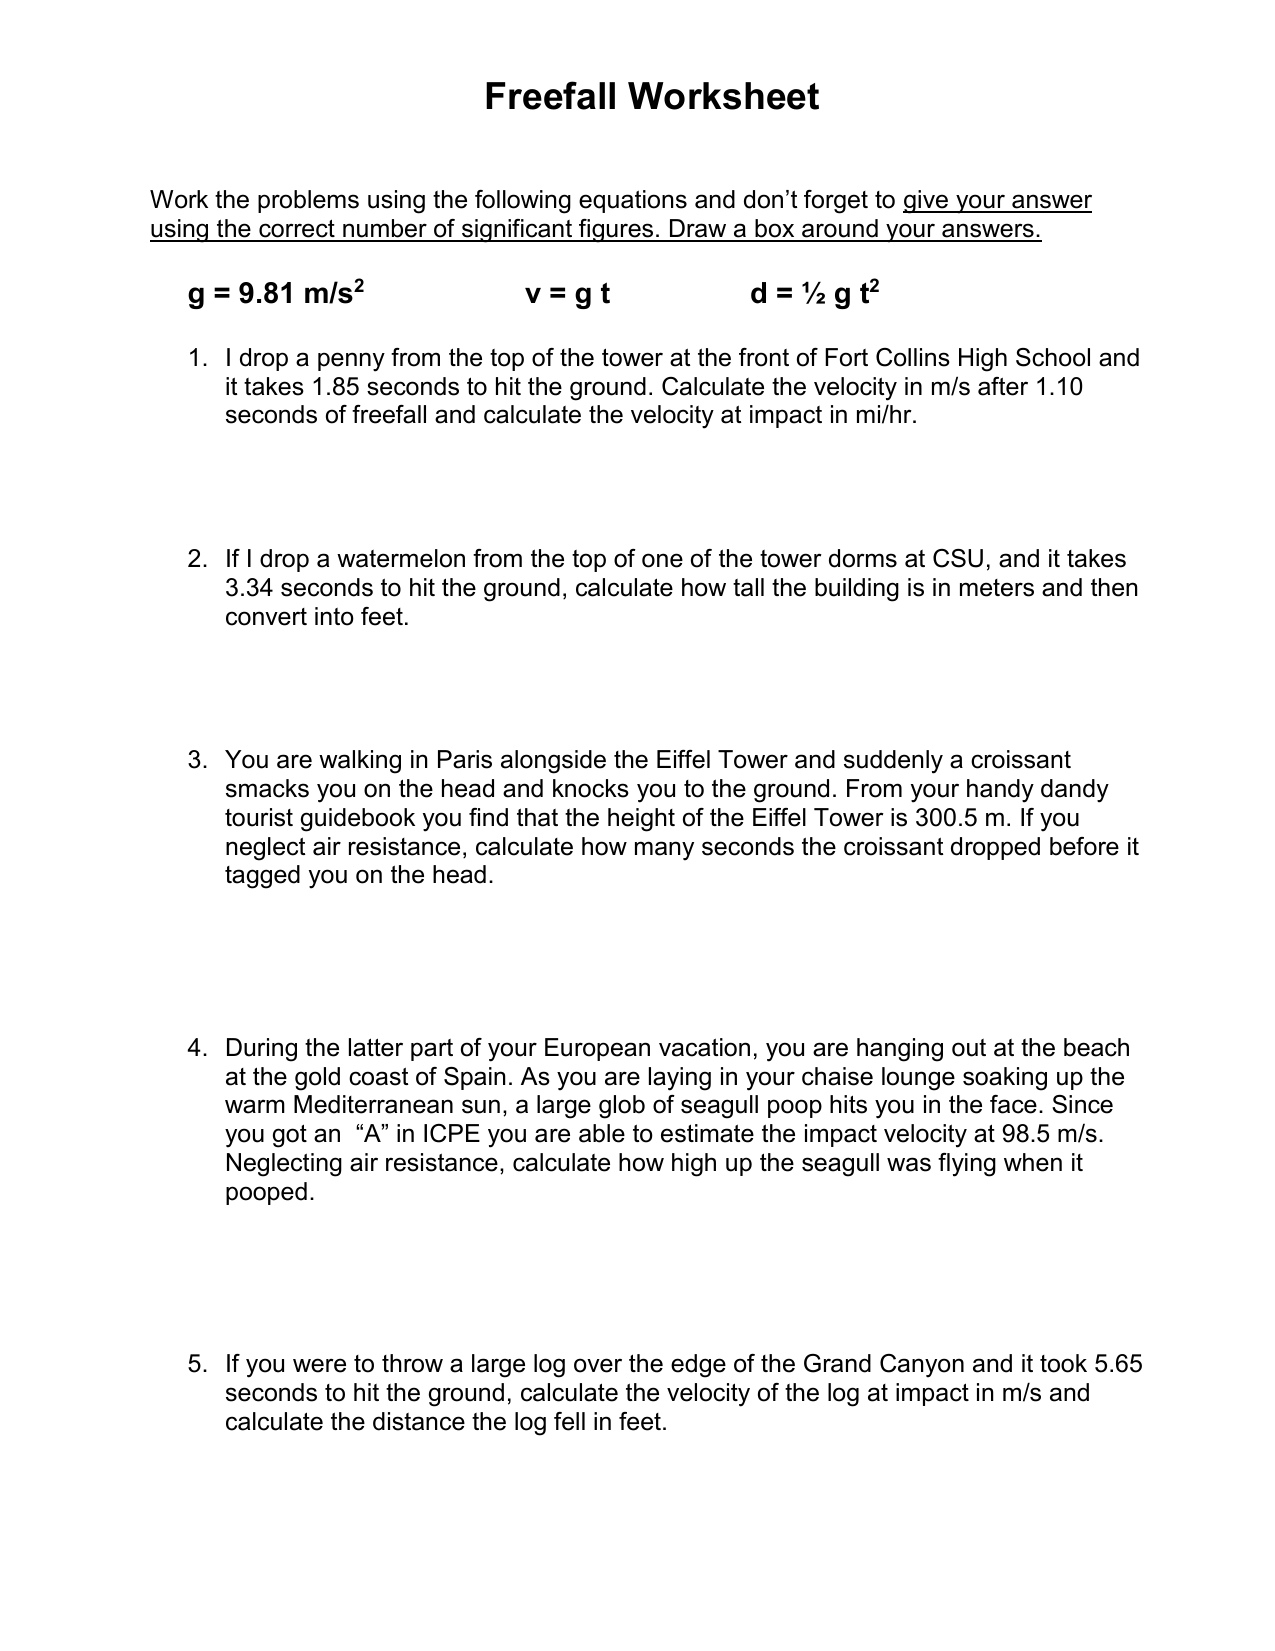 30-free-fall-problems-worksheet-with-answers-pdf